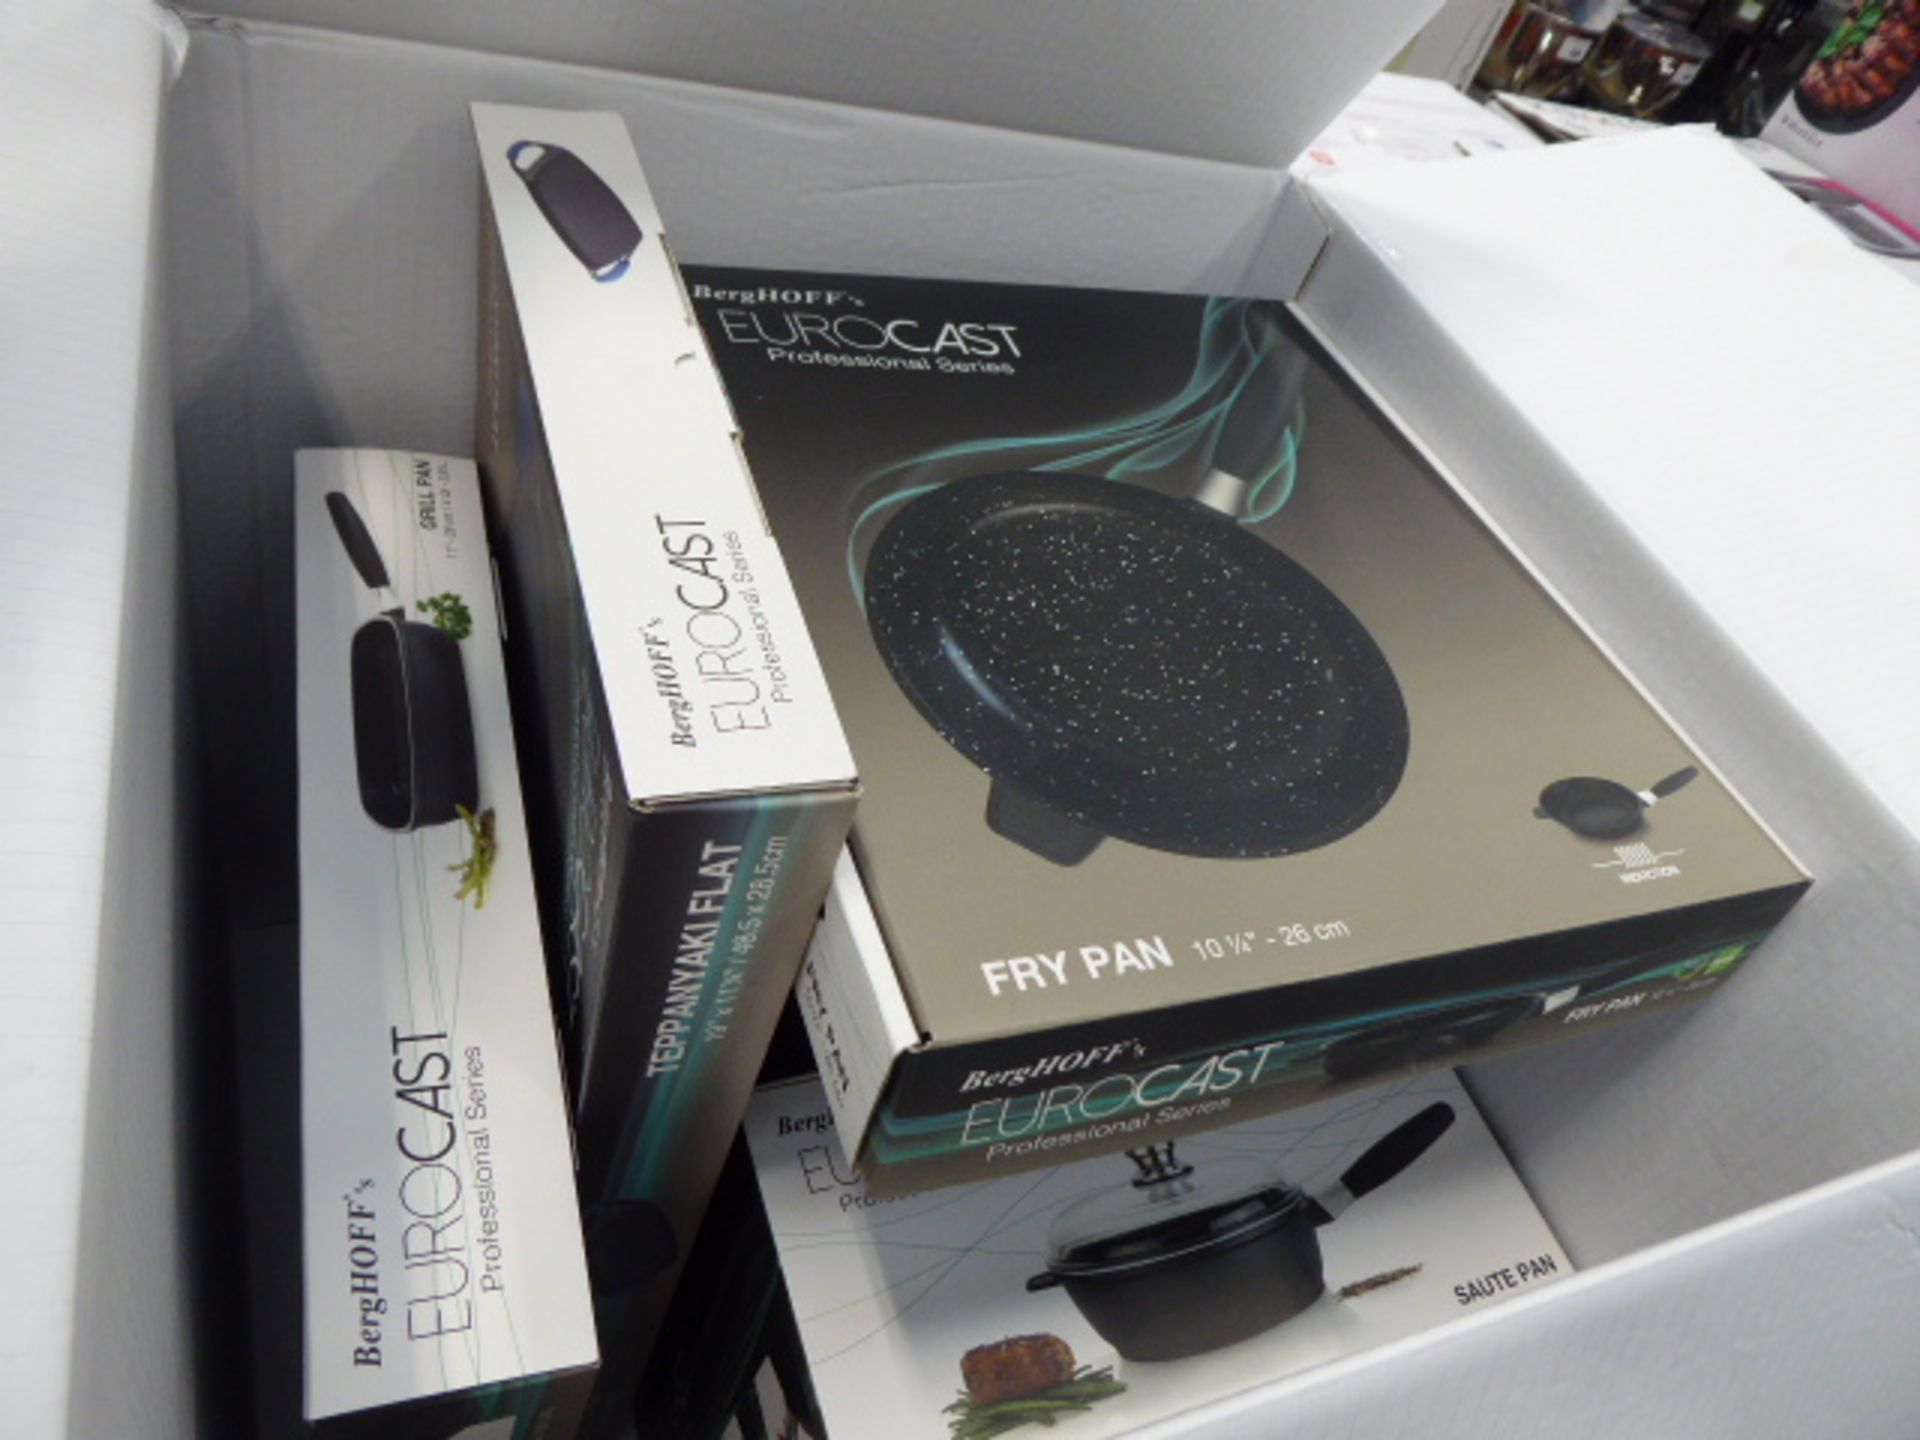 Boxed Eurocast Professional Series cookware set - Image 2 of 4